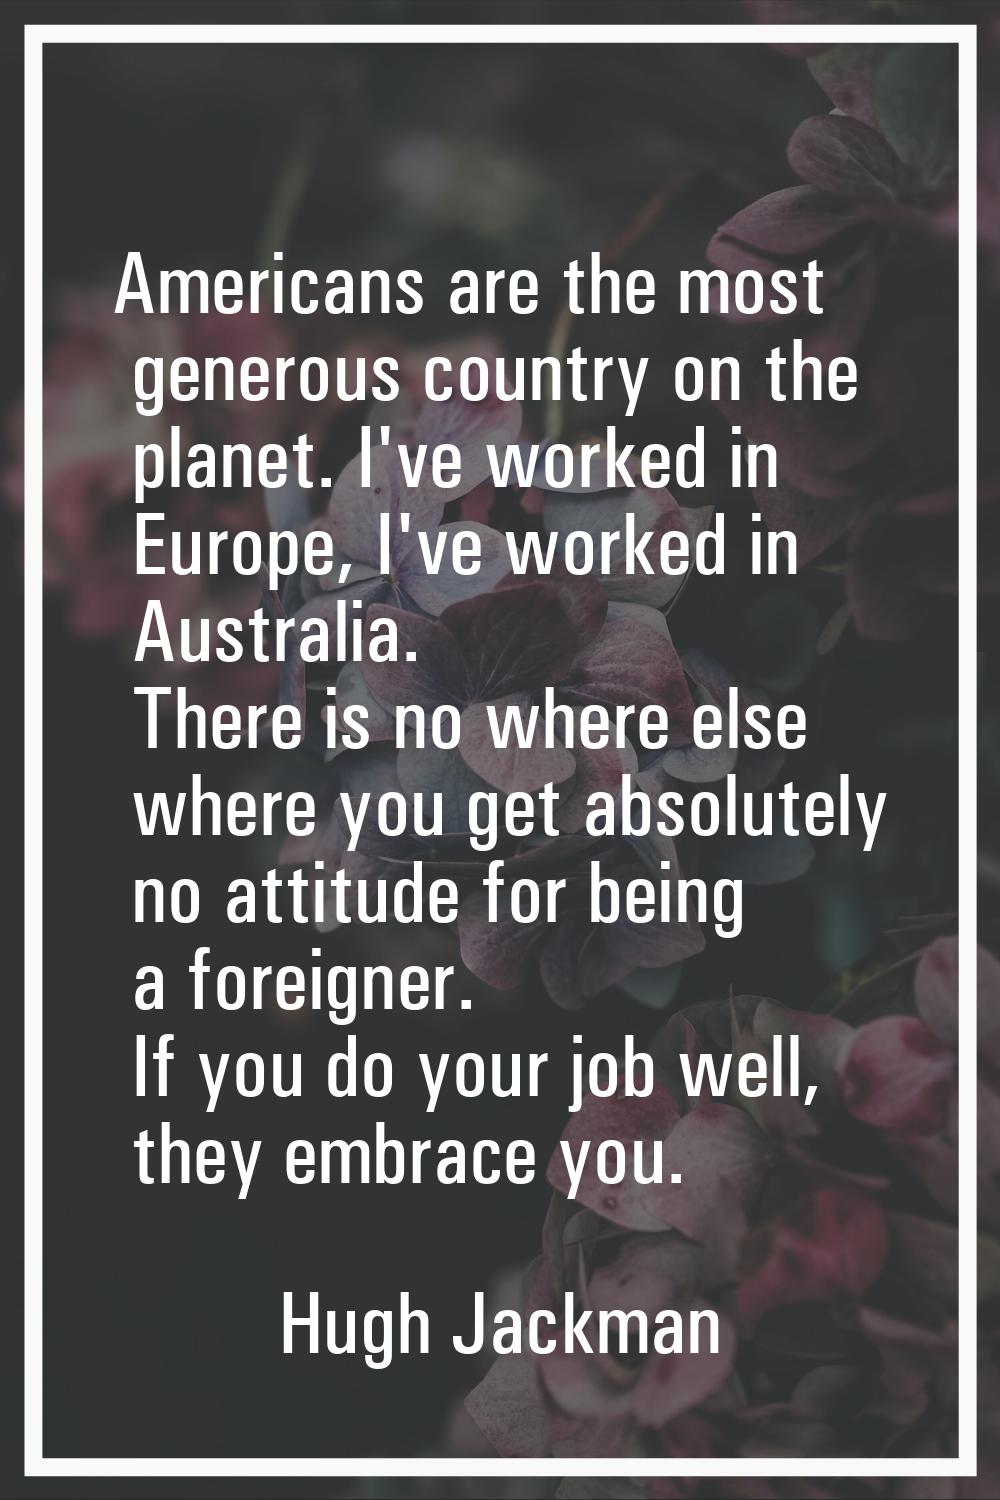 Americans are the most generous country on the planet. I've worked in Europe, I've worked in Austra